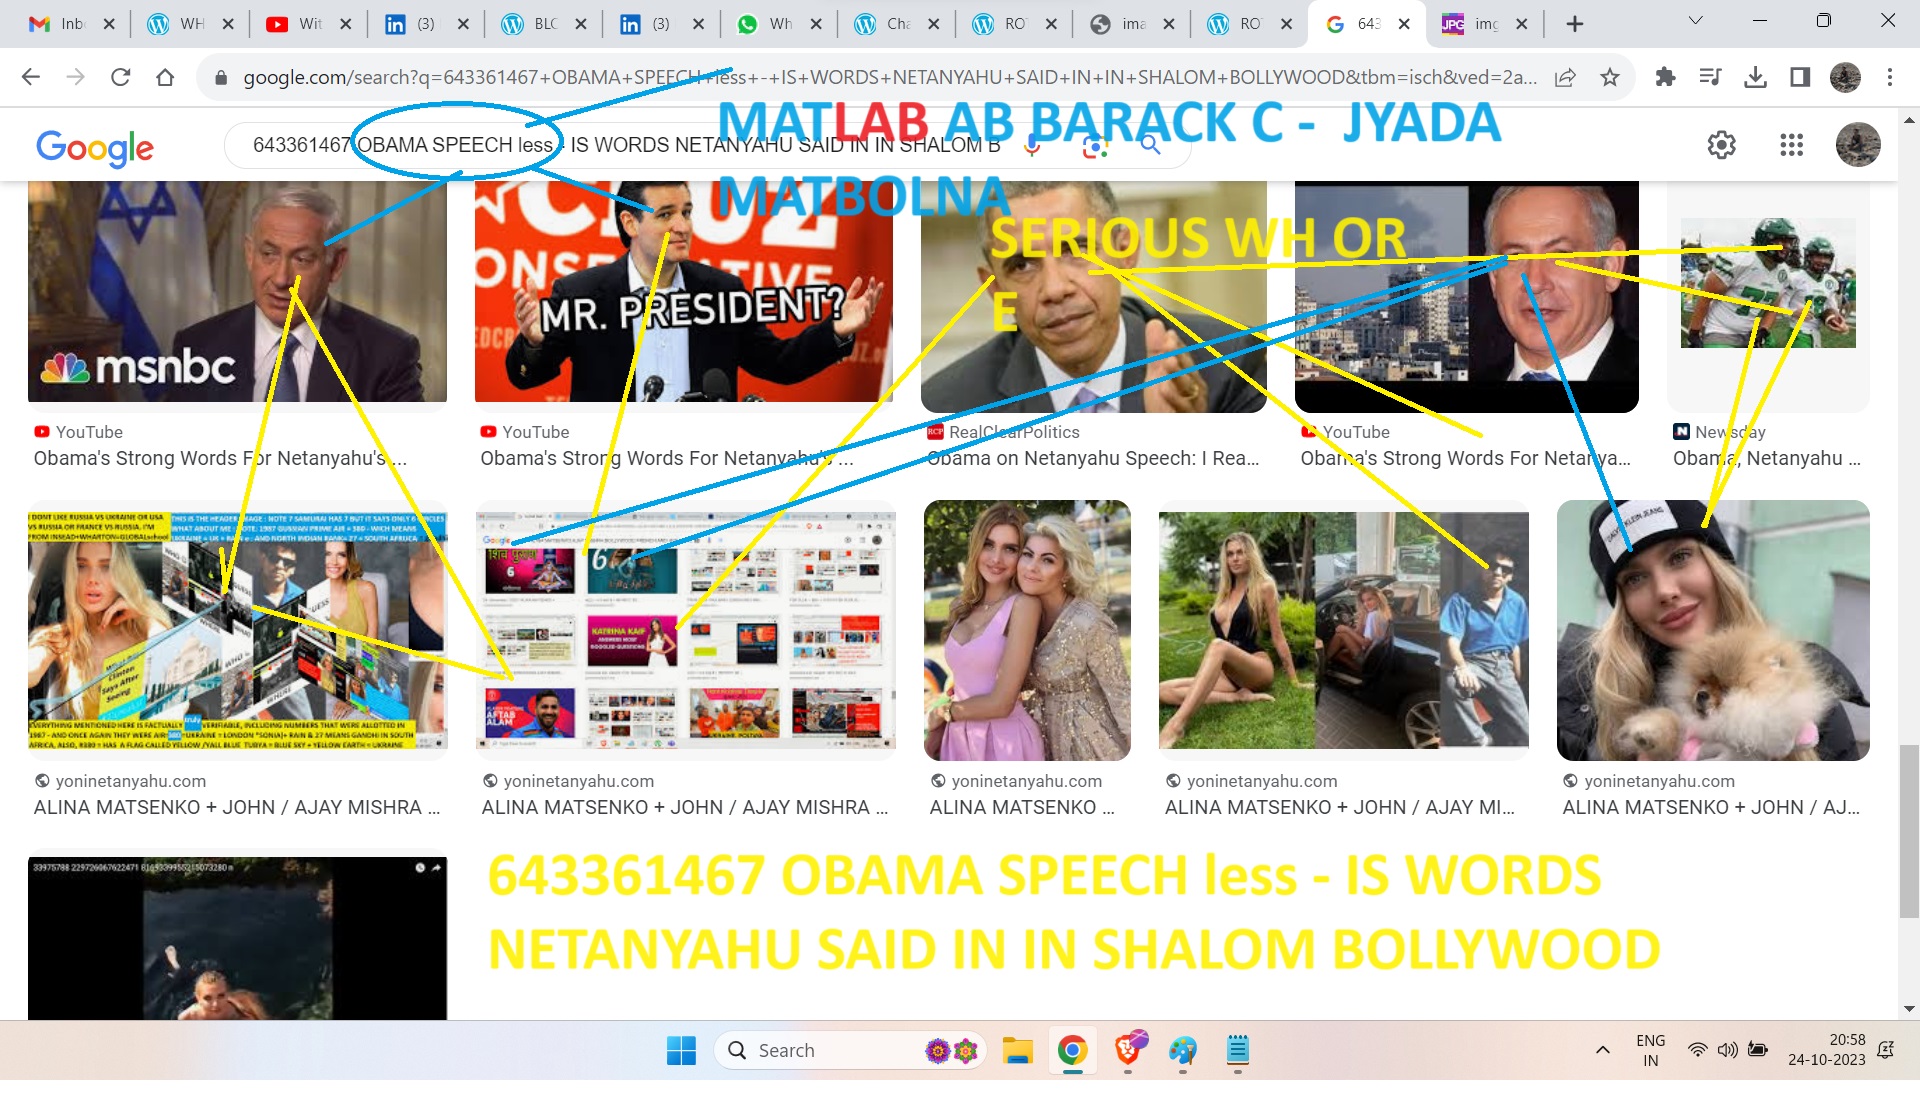 643361467 OBAMA SPEECH less - IS WORDS NETANYAHU SAID IN IN SHALOM BOLLYWOOD